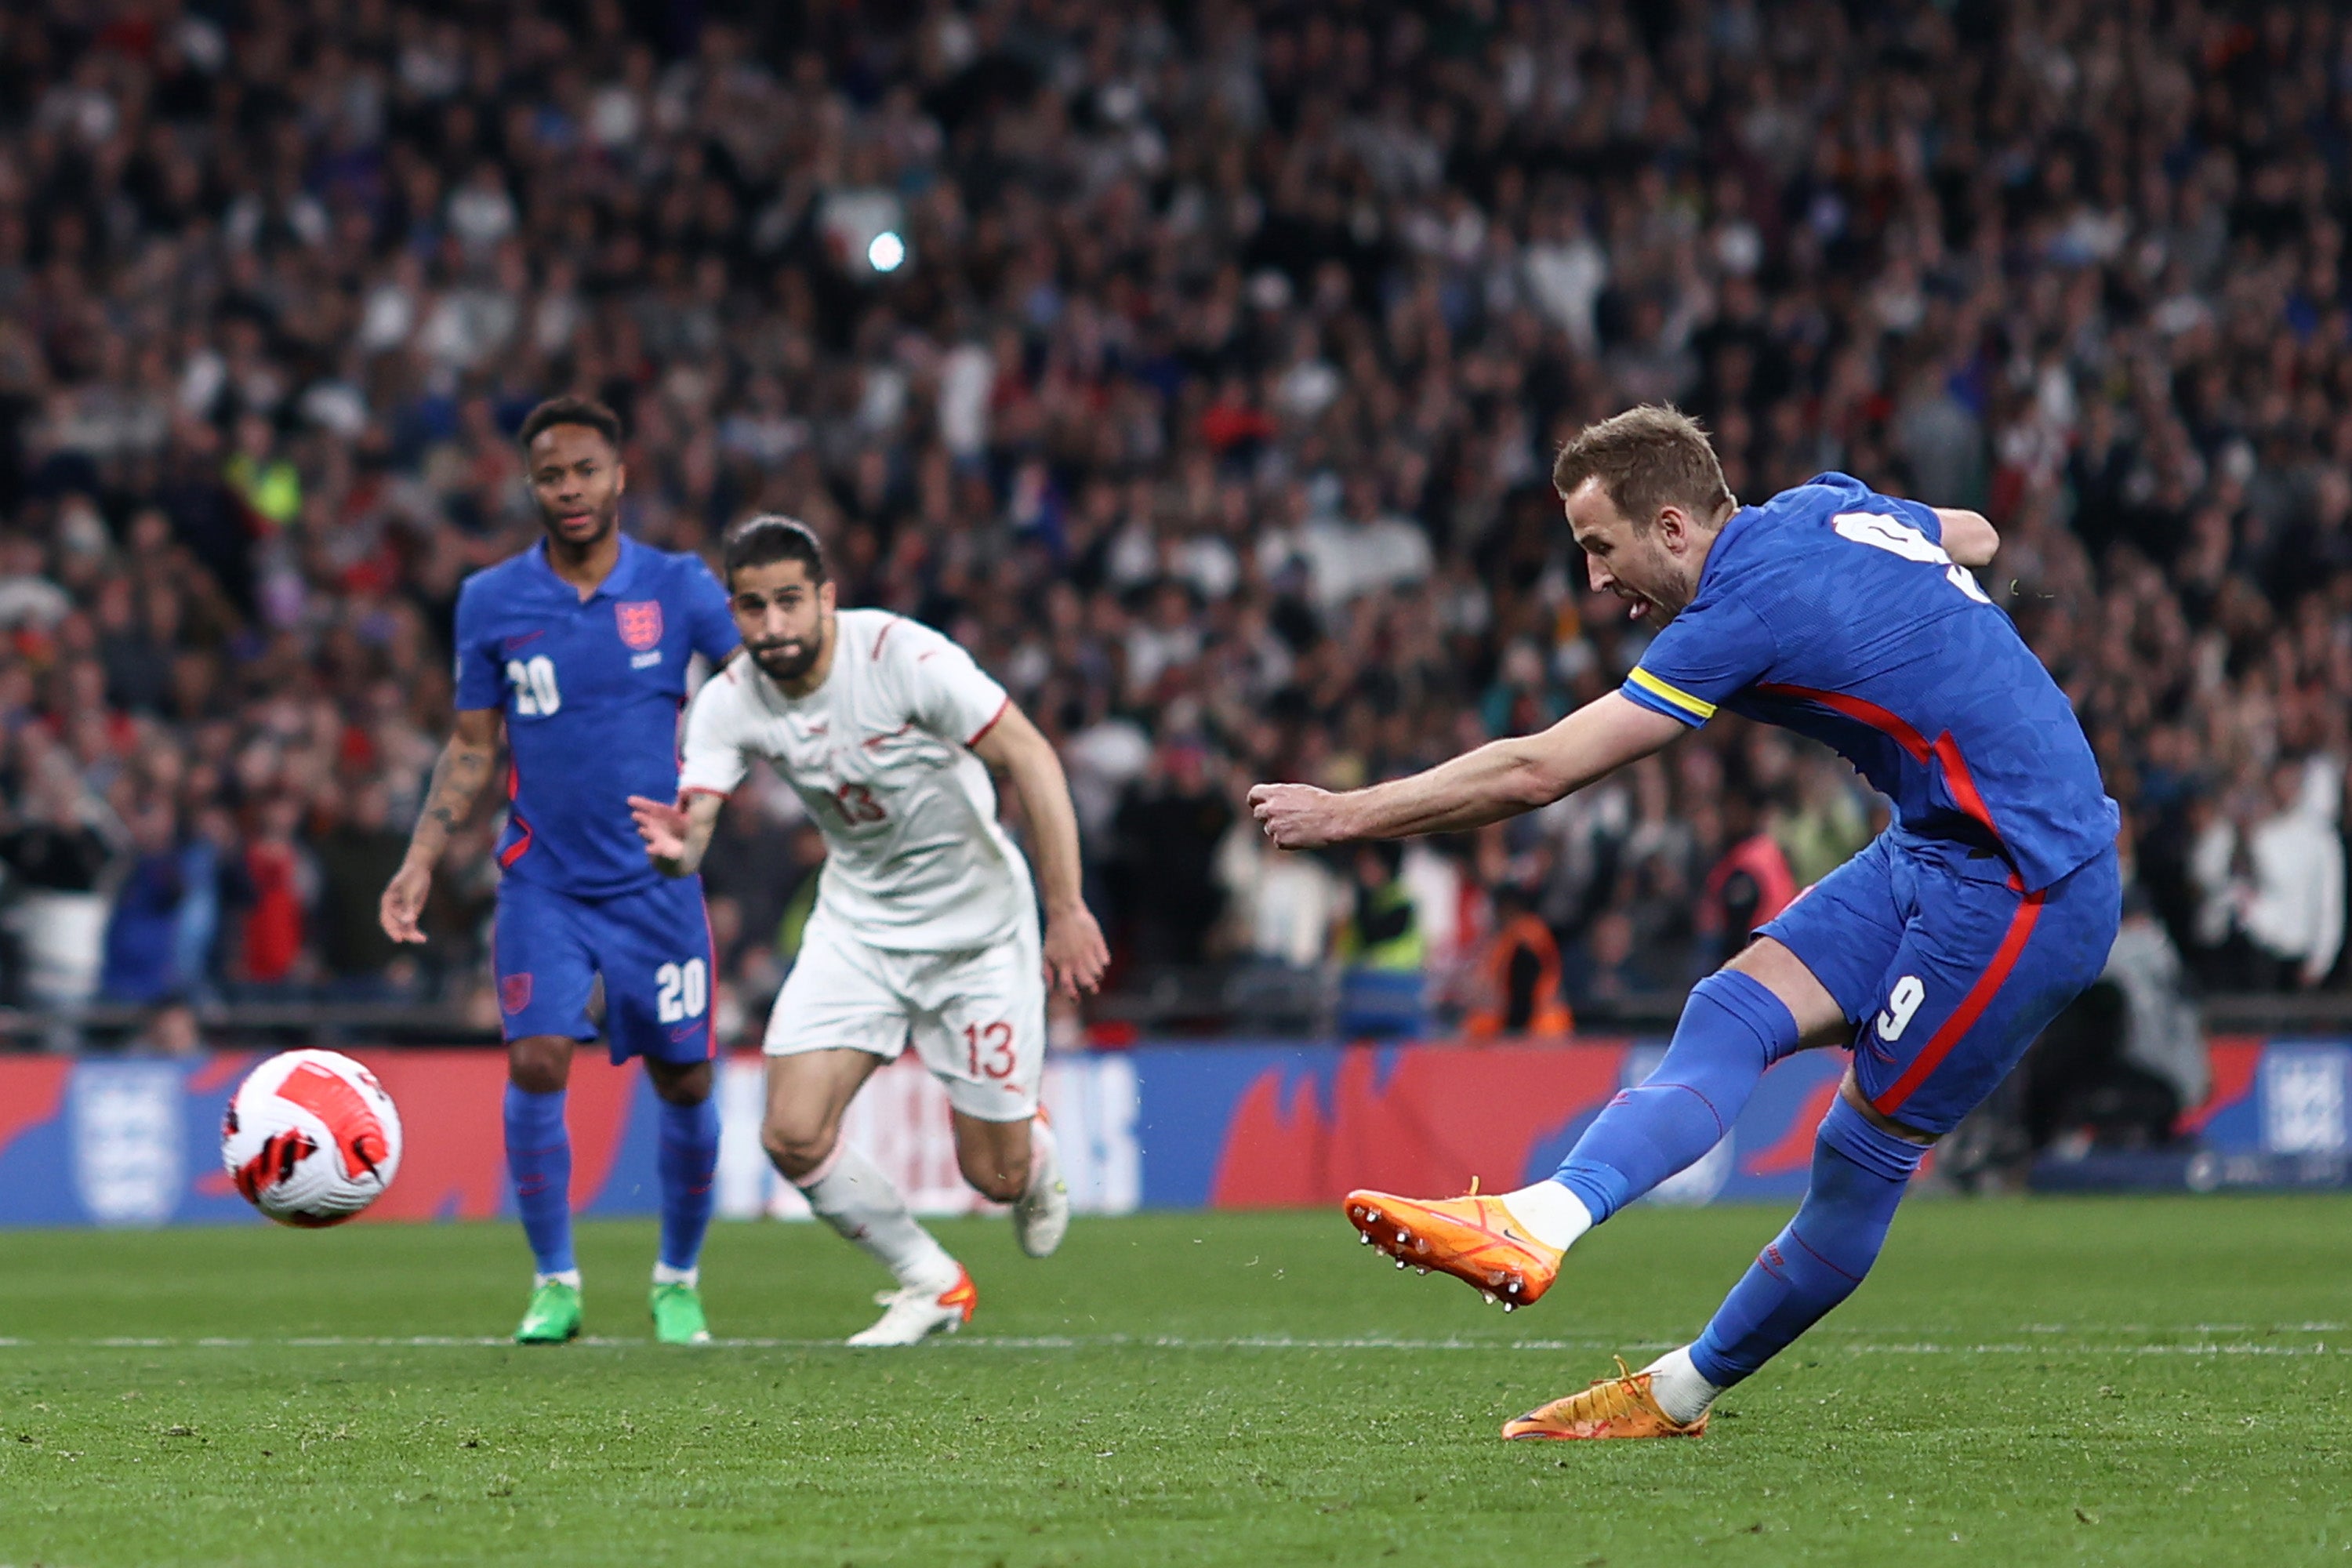 Kane converted a penalty in Saturday’s win against Switzerland – but England’s options seem bare behind their captain